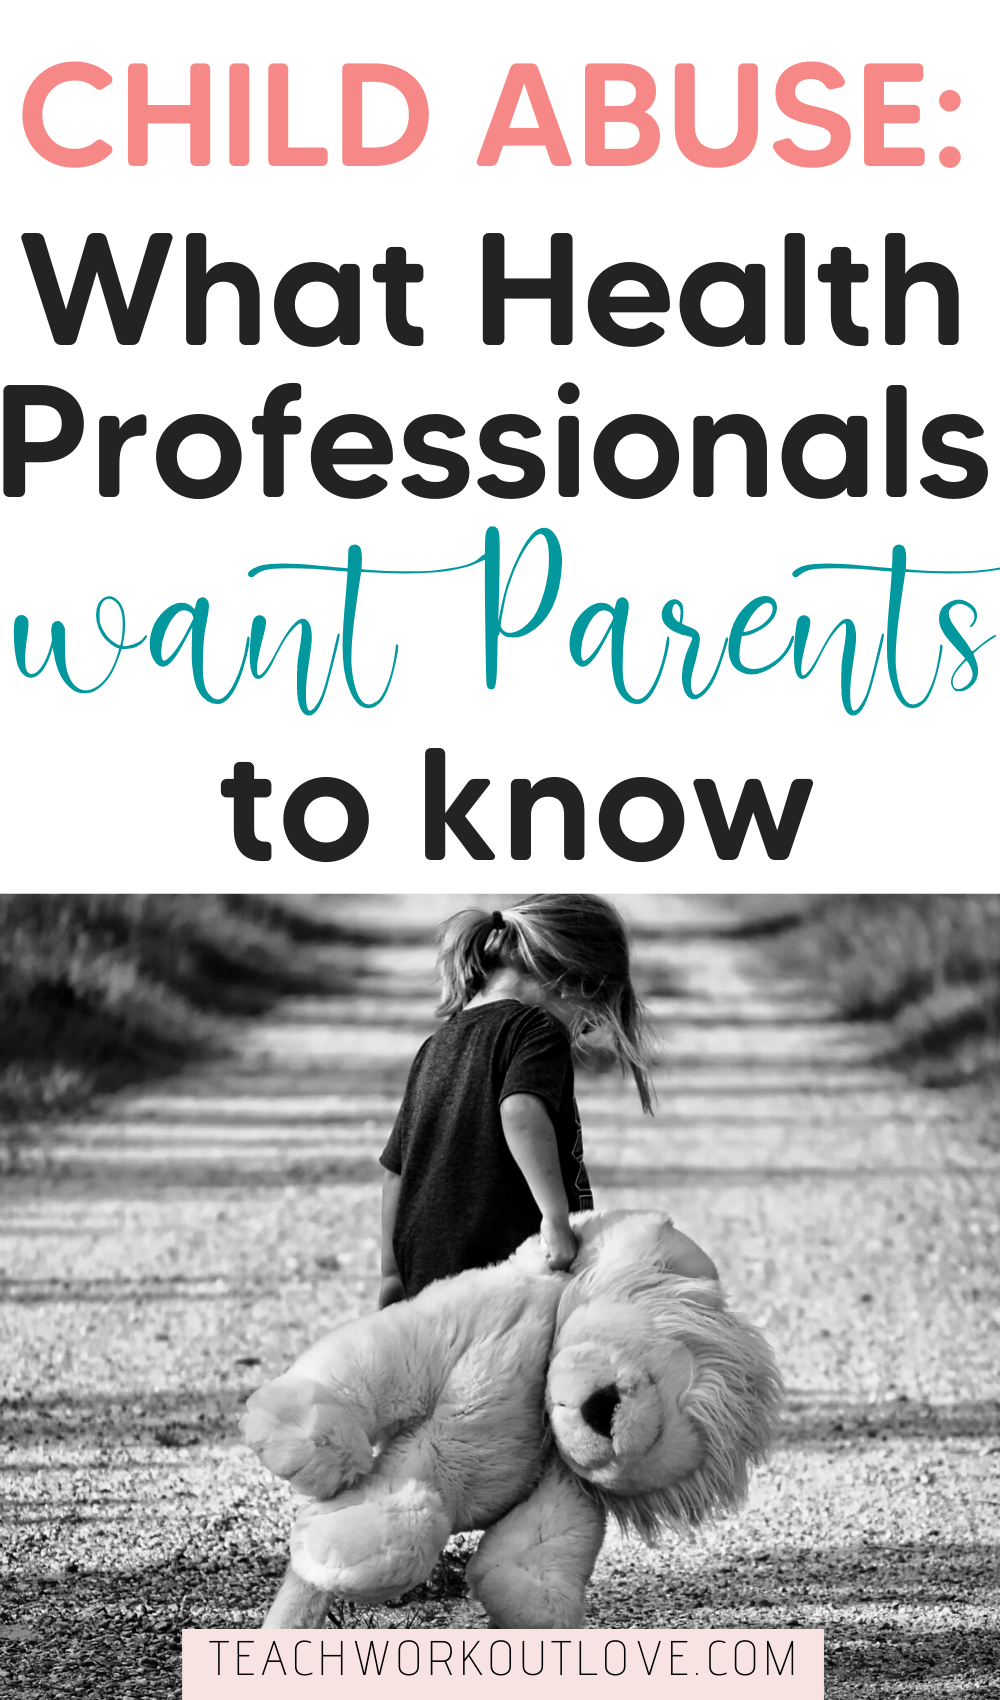 Read on to see questions and answers for what parents need to know about child abuse from a knowledgeable health official, Dr. Joyce Gilbert.